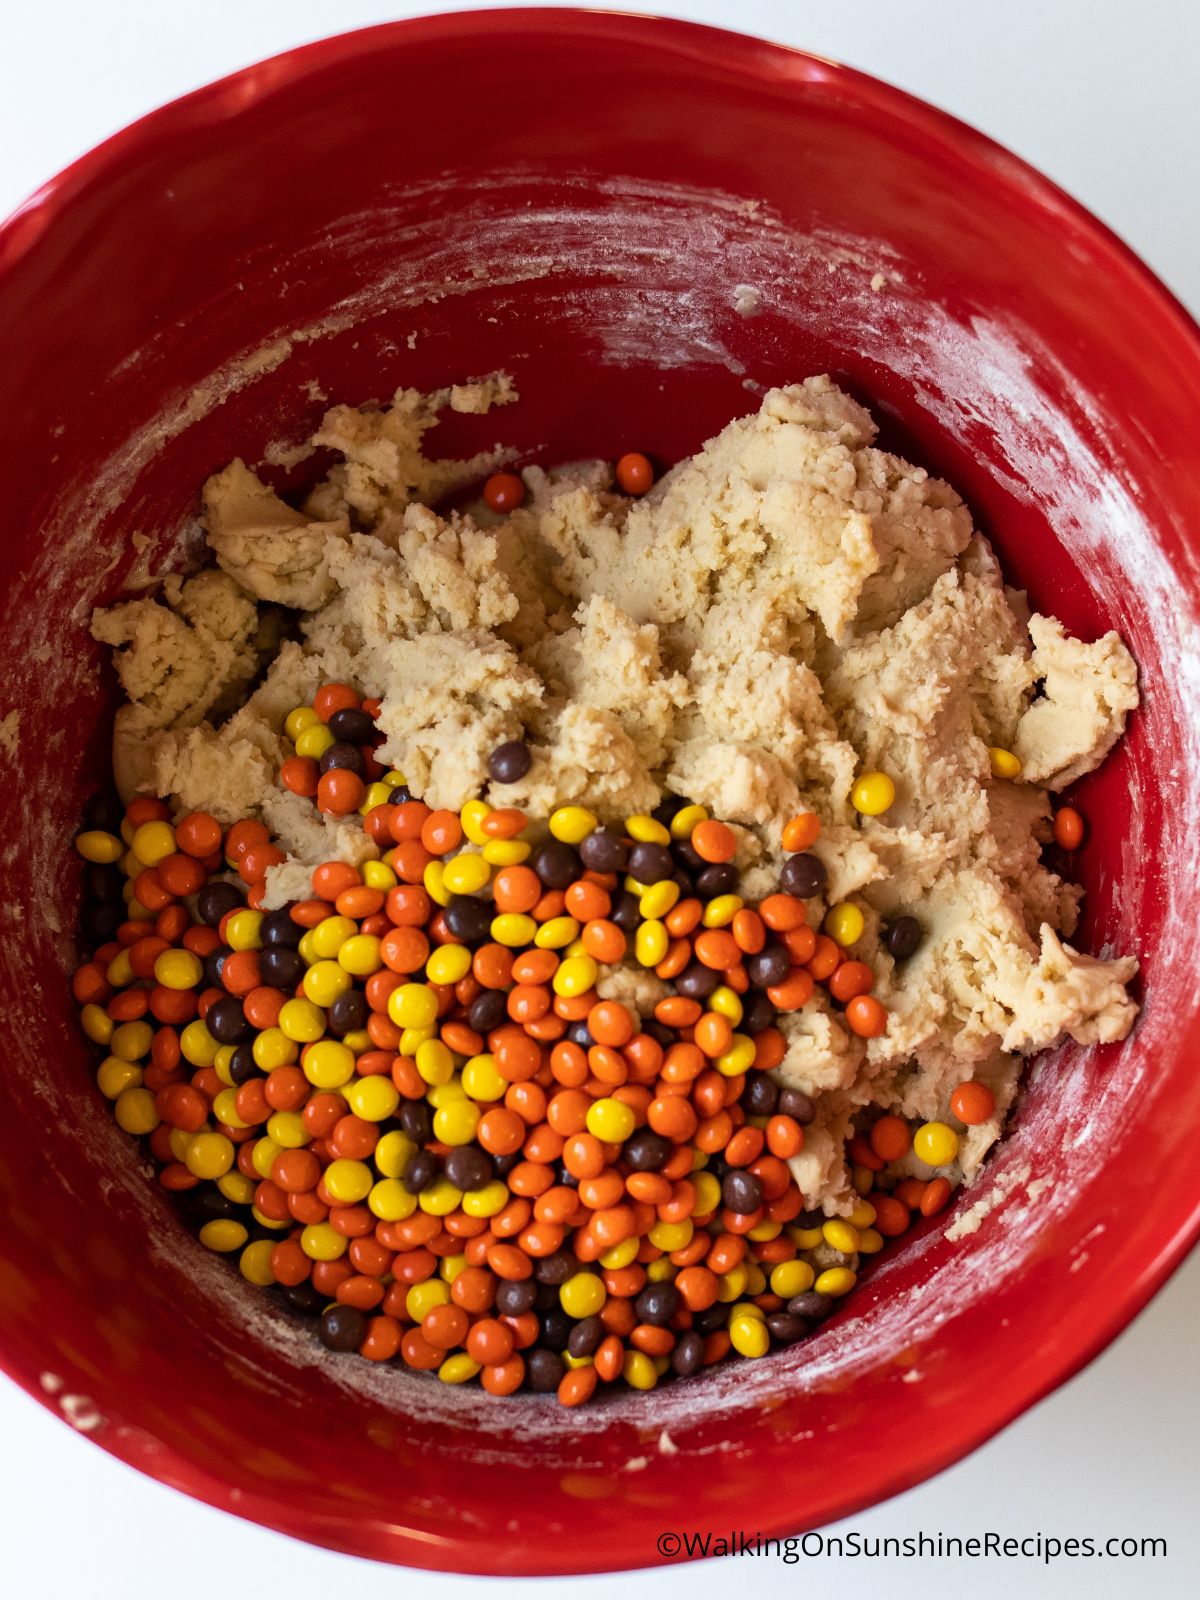 Reese's peanut butter pieces in cookie dough in bowl.